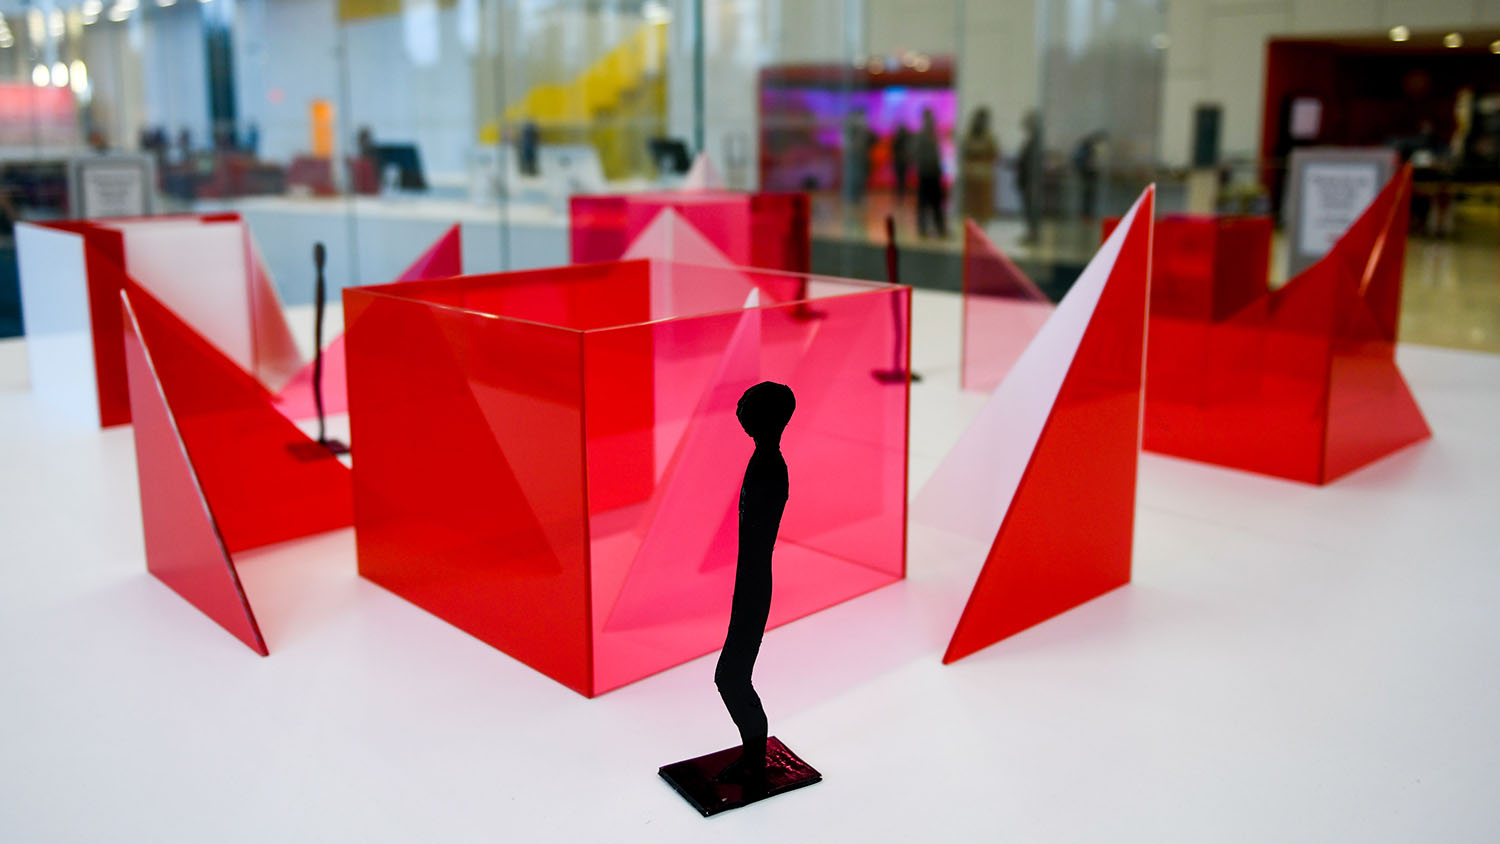 Photo features a maquette of artist Larry Bell's "Reds and Whites" installation slated for Centennial Campus, featuring red and white sculptural blocks, in the lobby of Hunt Library.